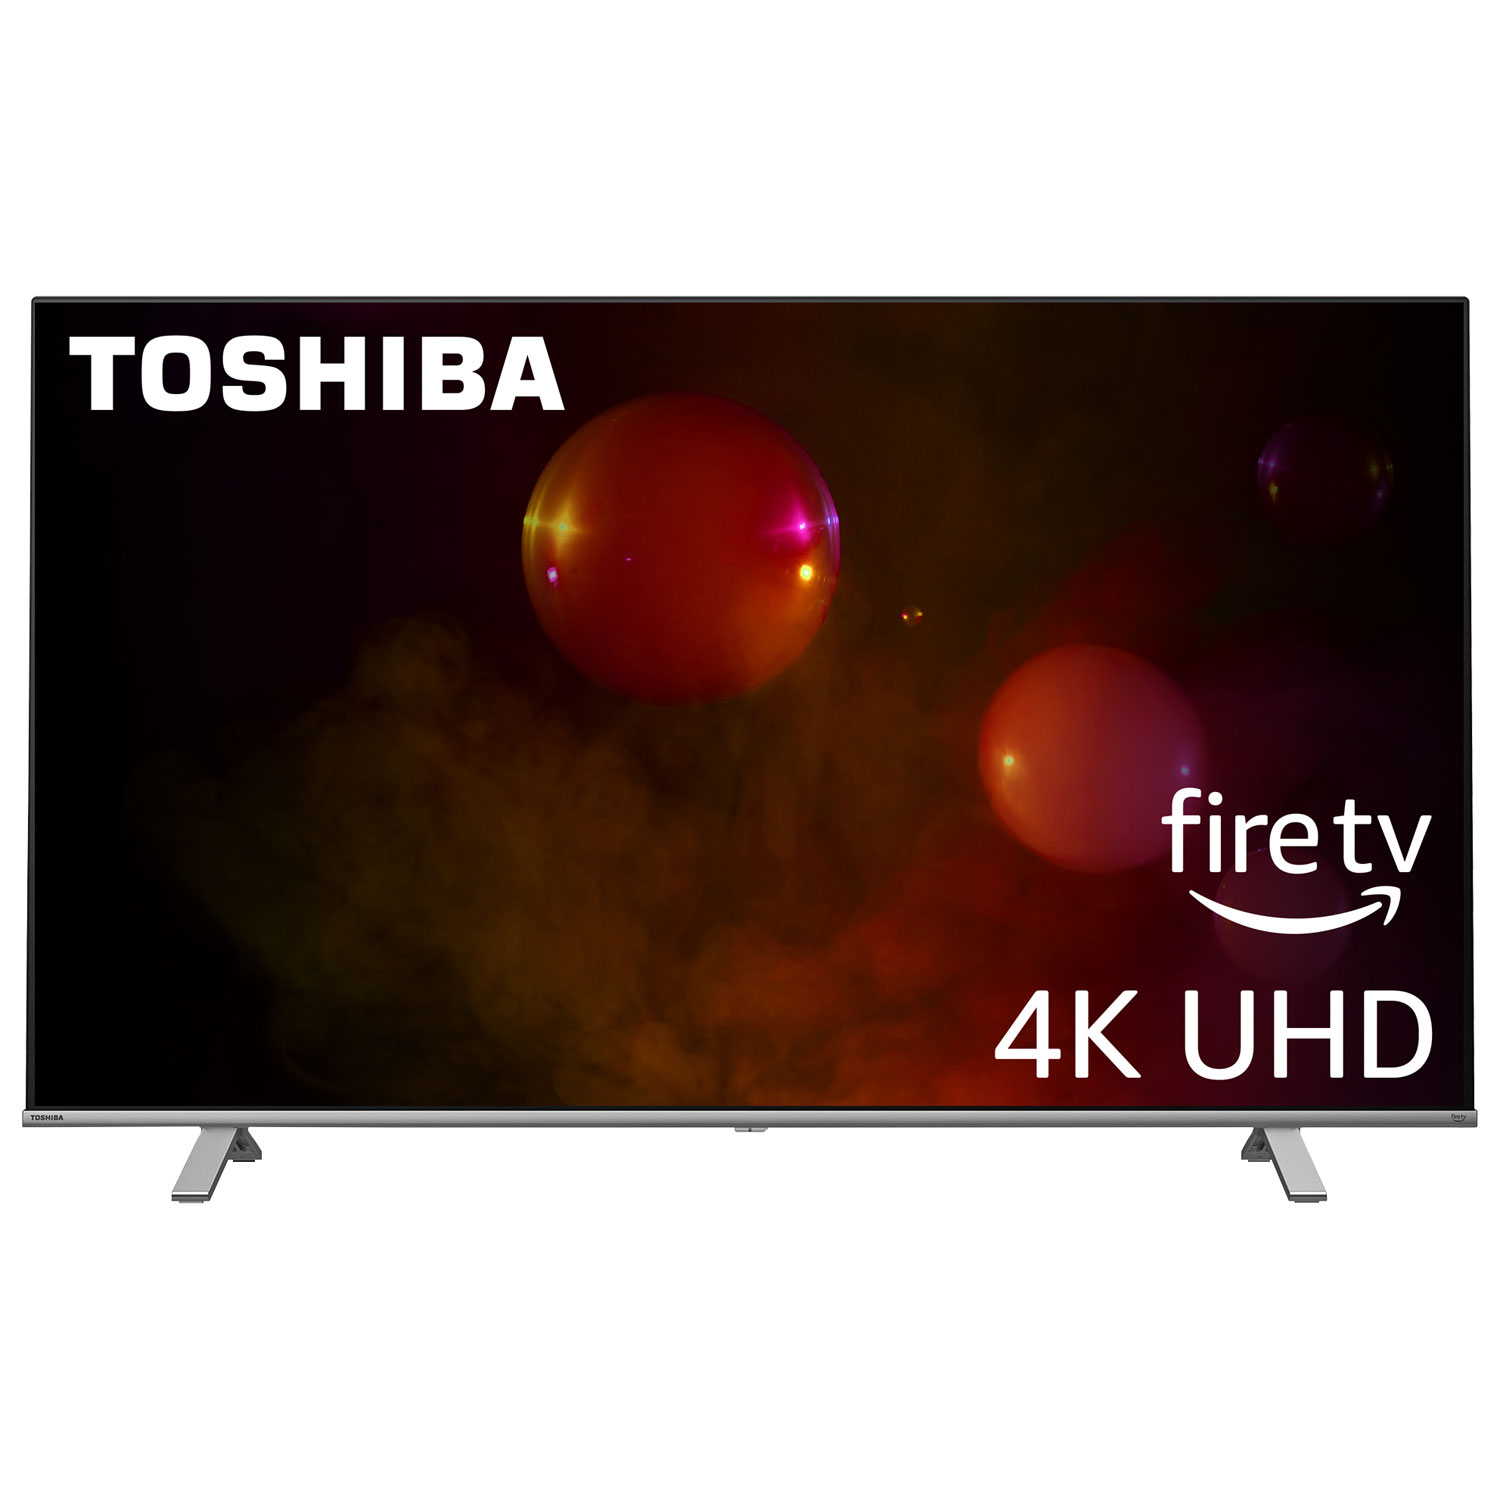 Toshiba 65" 4K UHD HDR LED Smart TV (65C350KC) - Fire TV Edition - 2021 - Only at Best Buy